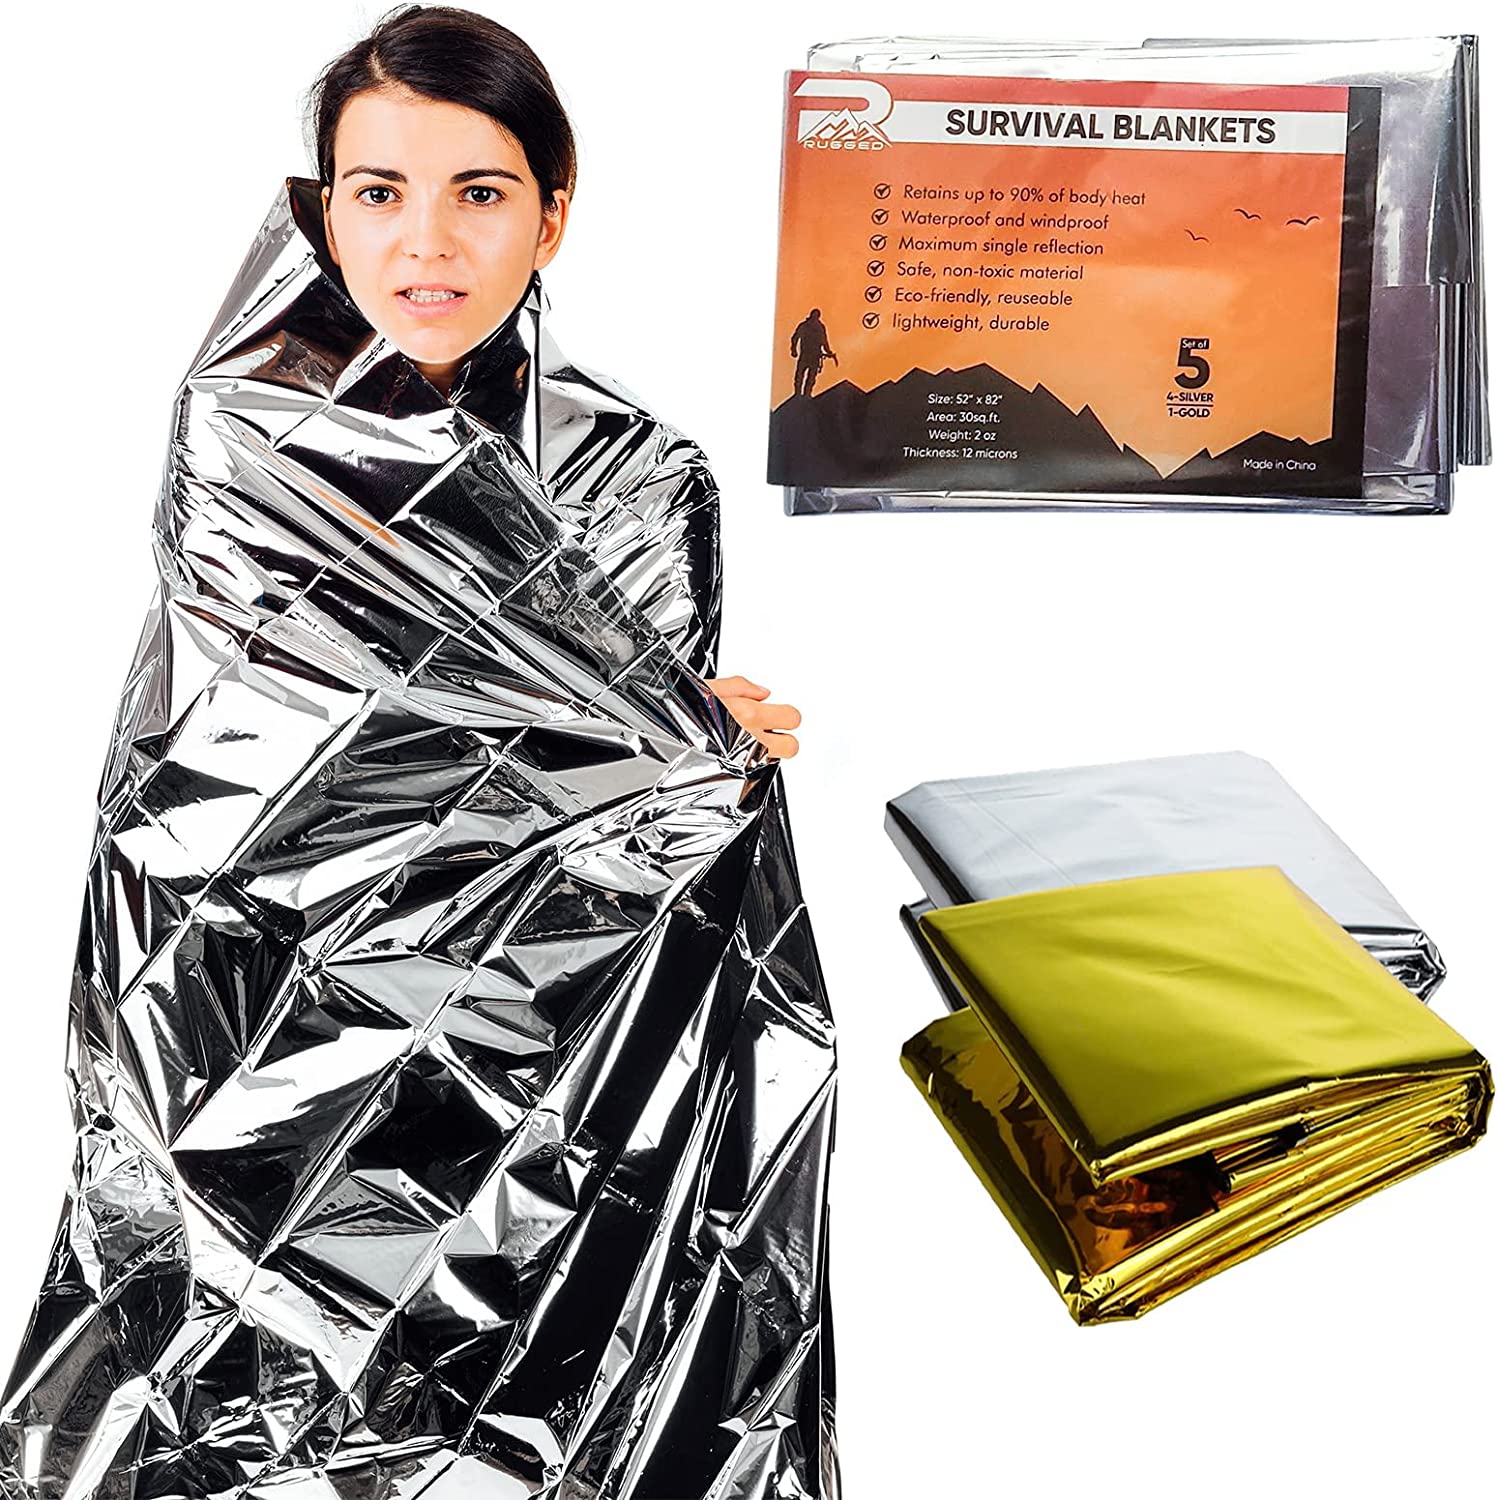 Rainier Rugged Survival Blankets – Waterproof & Windproof Emergency Cover, Reflective Exterior – Helps Retain Body Heat – 12 Microns, Compact & Lightweight – 5-Pack, 4 Silver, 1 Gold – 52×82”, 2oz